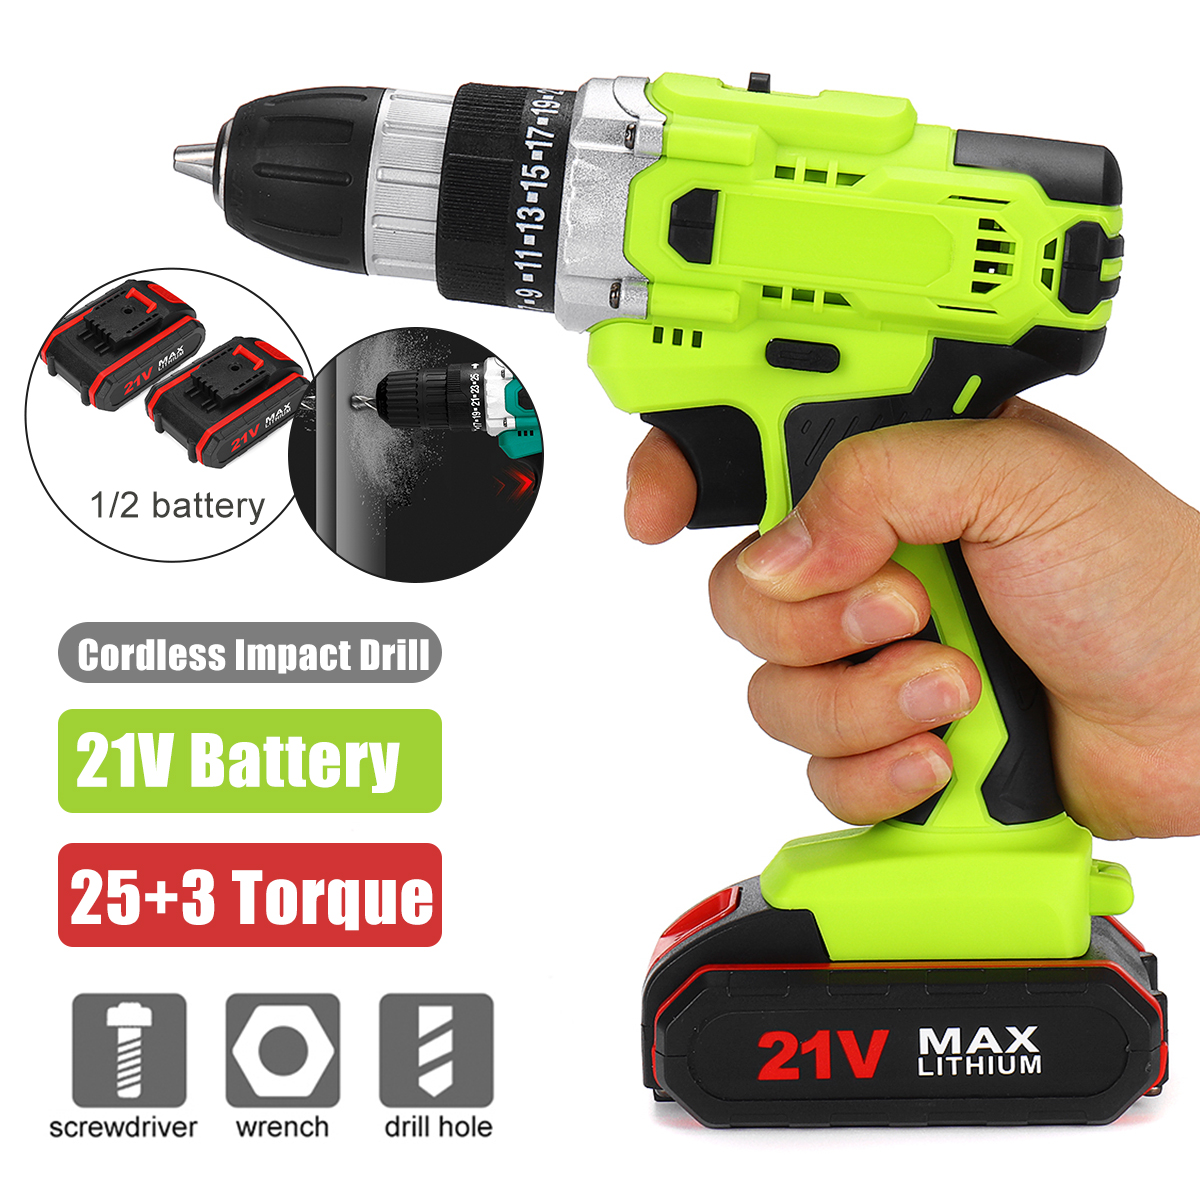 21V-Cordless-Impact-Drill-Set-3-IN-1-Electric-Torque-Wrench-Screwdriver-Drill-W-1-Or-2-Battery-Comes-1837421-2